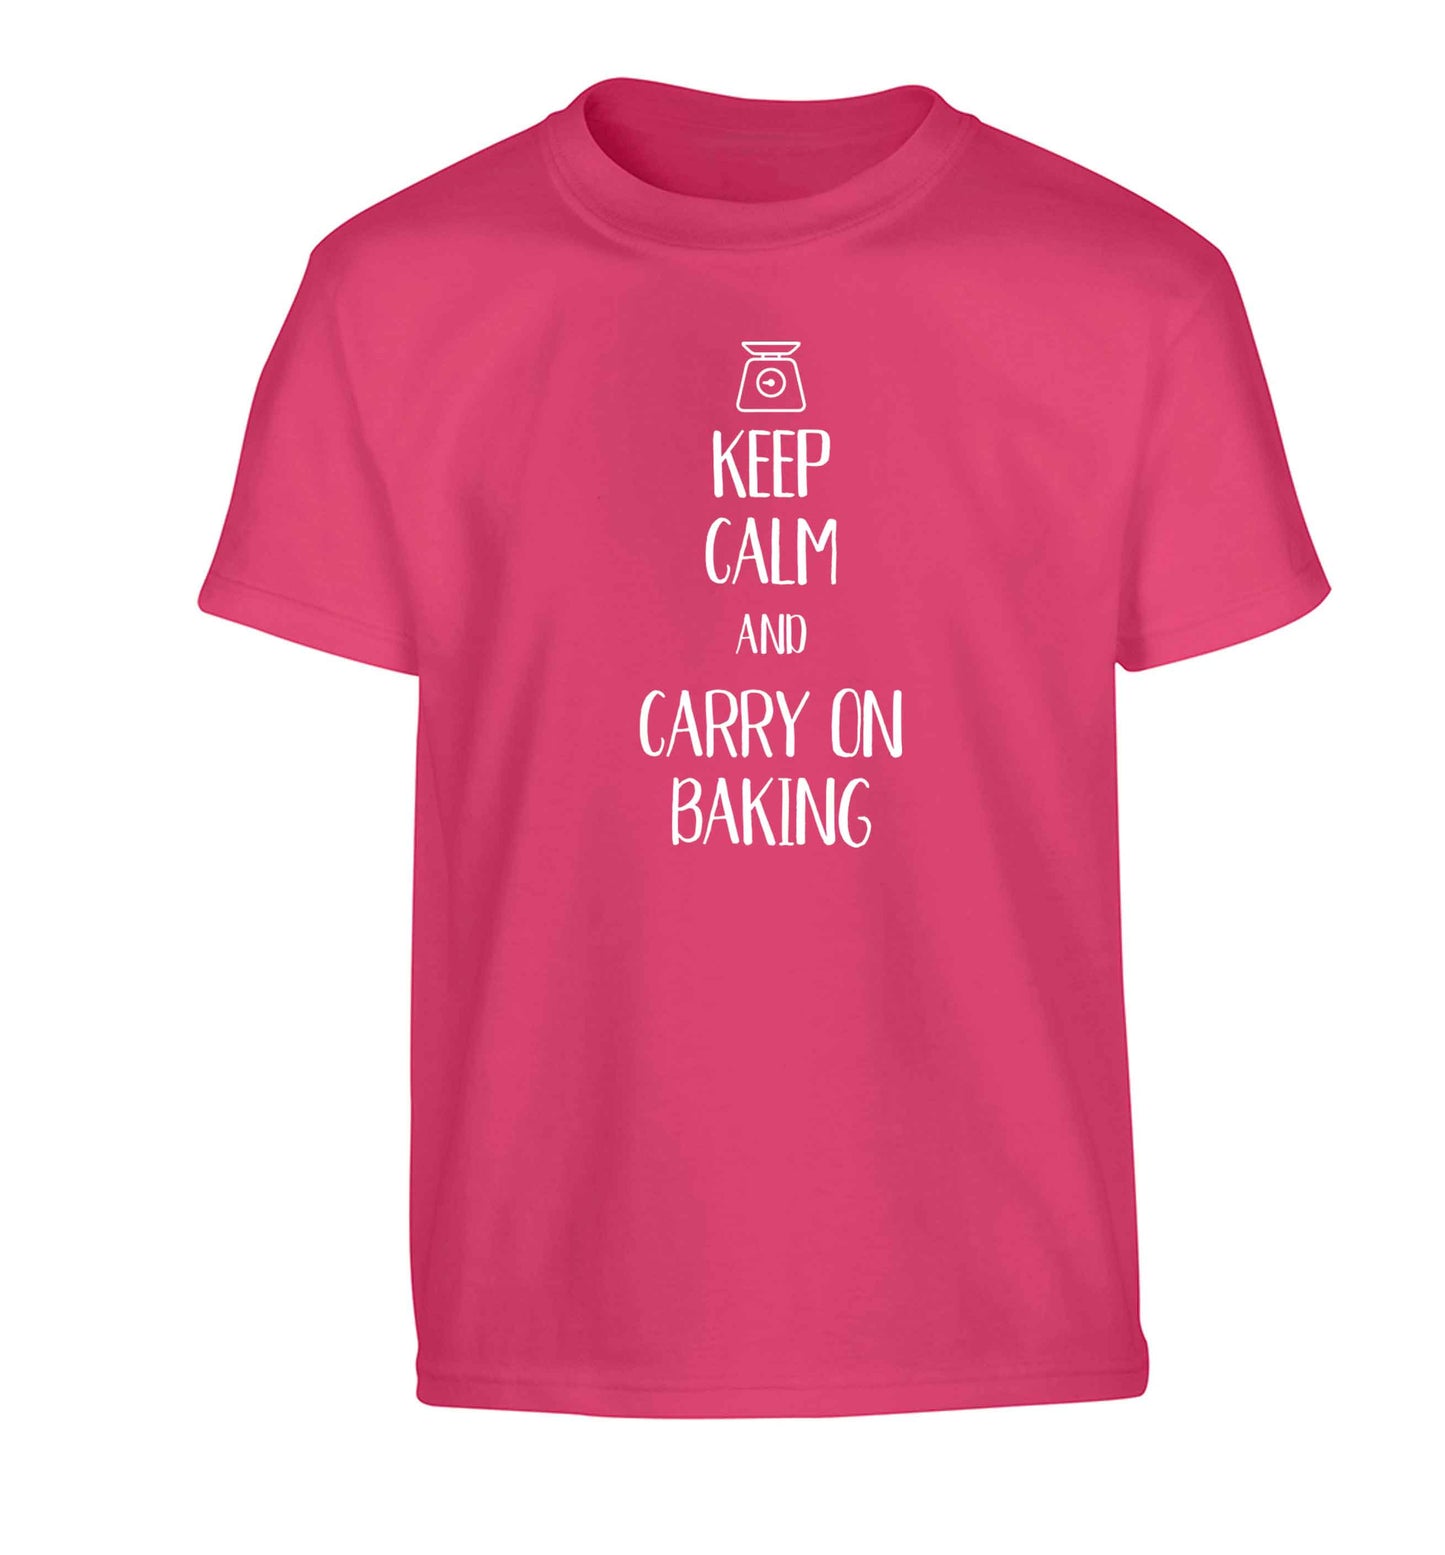 Keep calm and carry on baking Children's pink Tshirt 12-13 Years